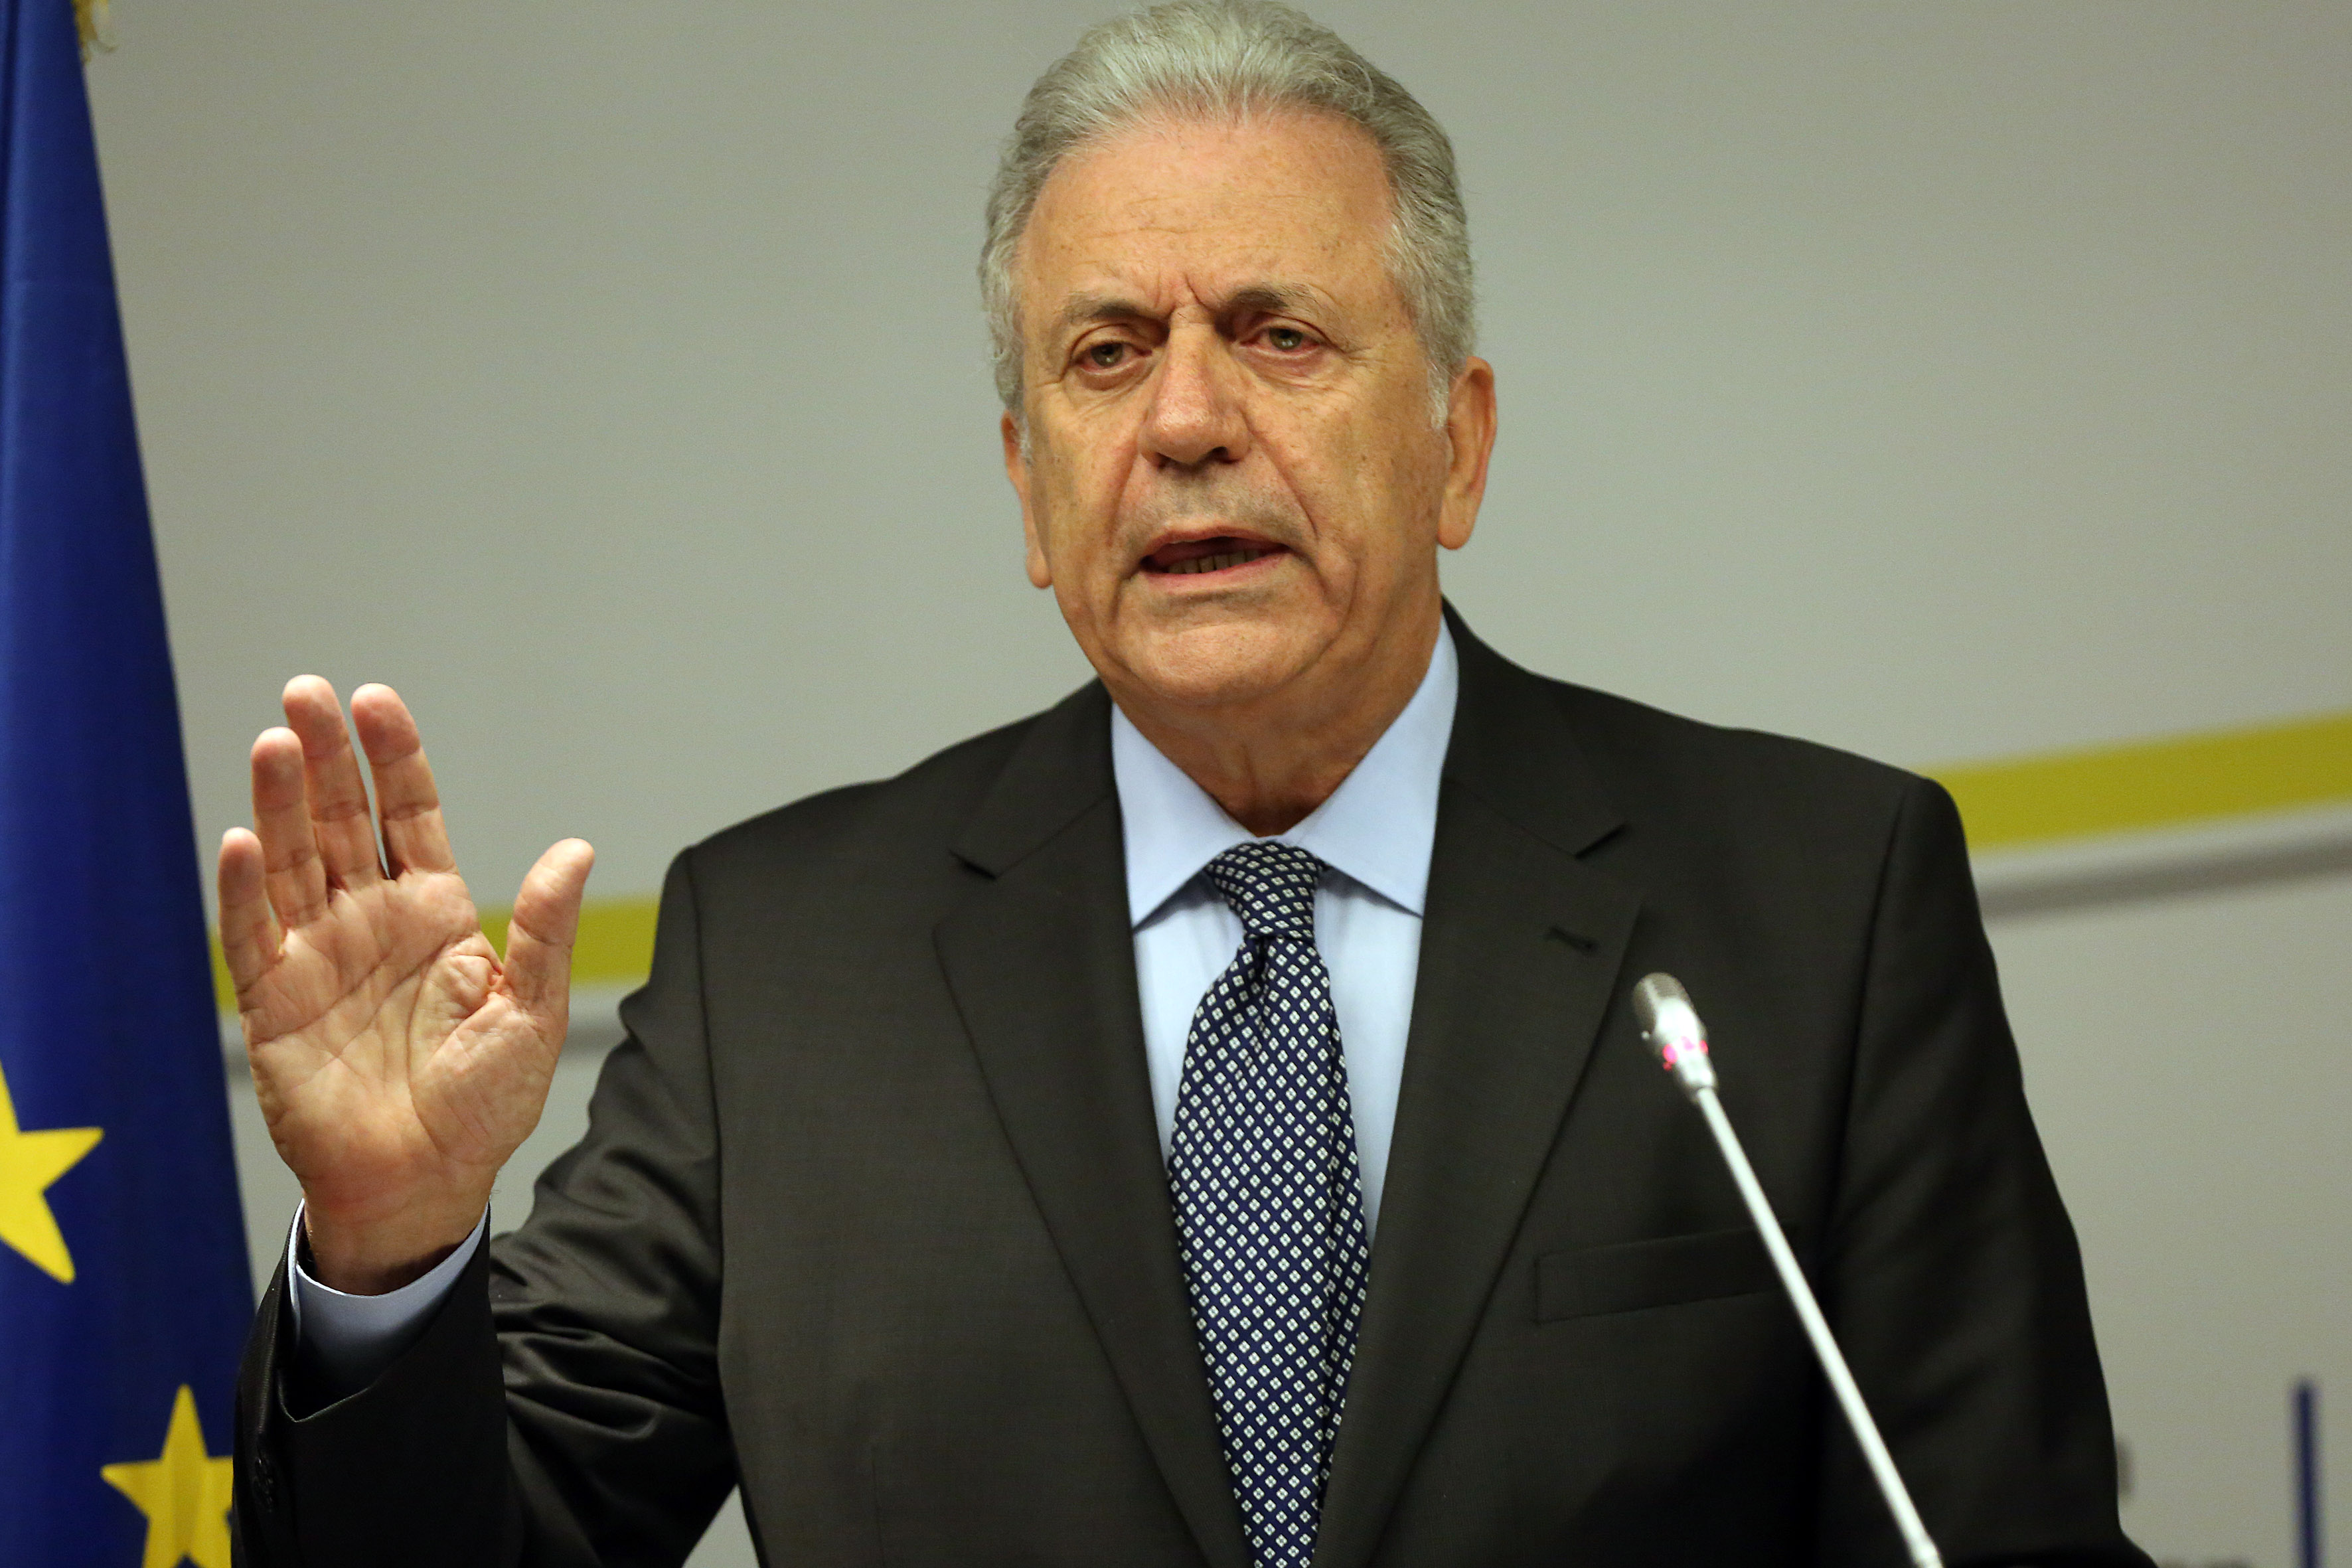 Avramopoulos demands that protected witnesses be revealed